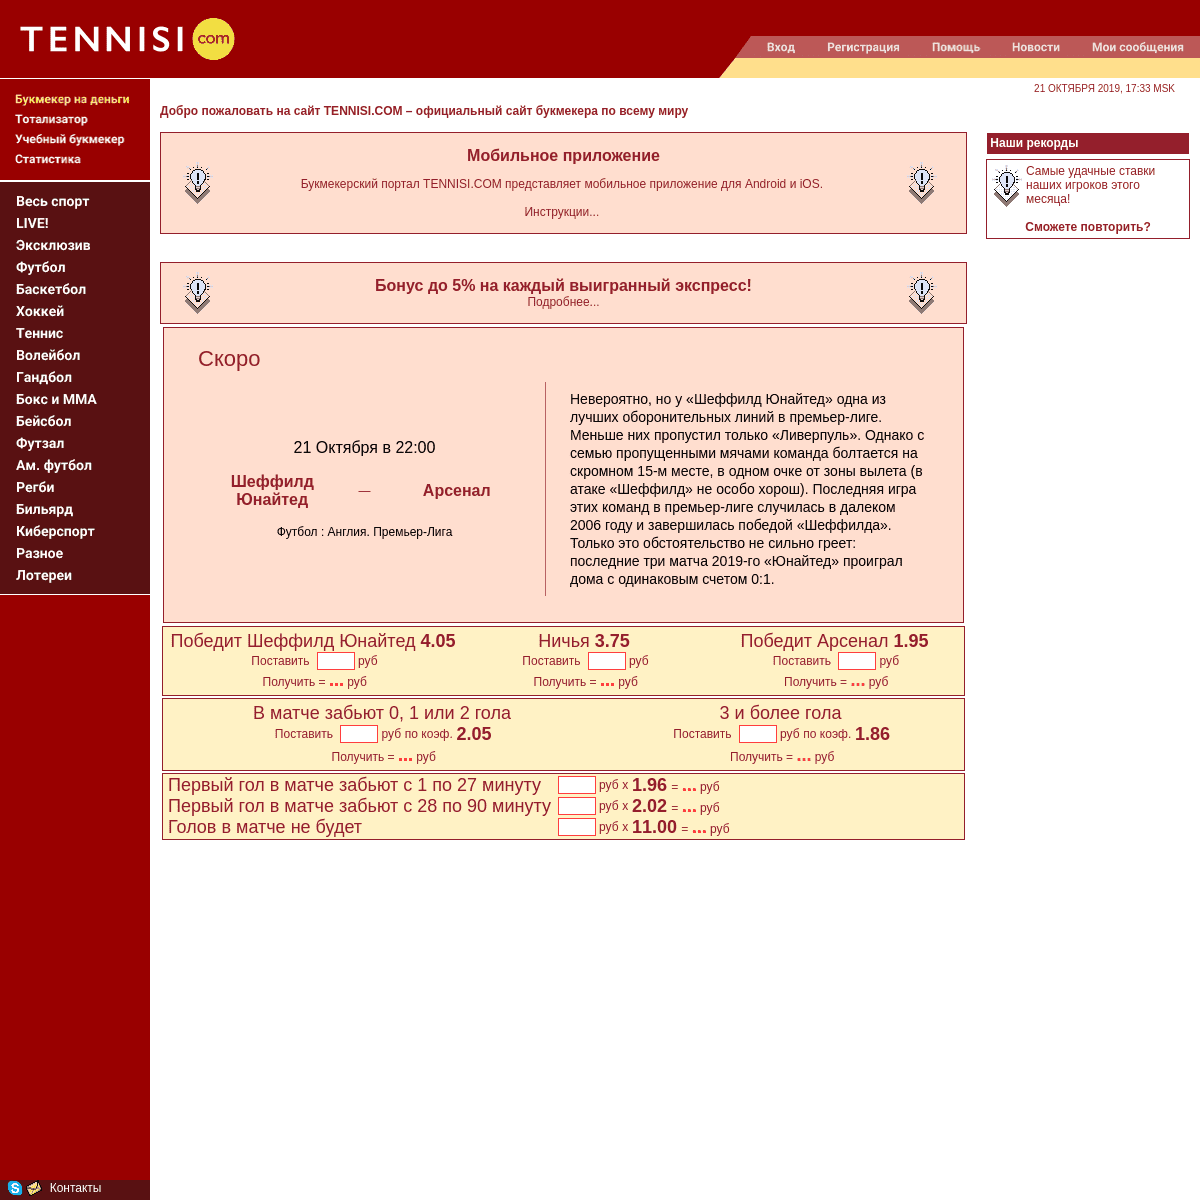 A complete backup of tennisi.com